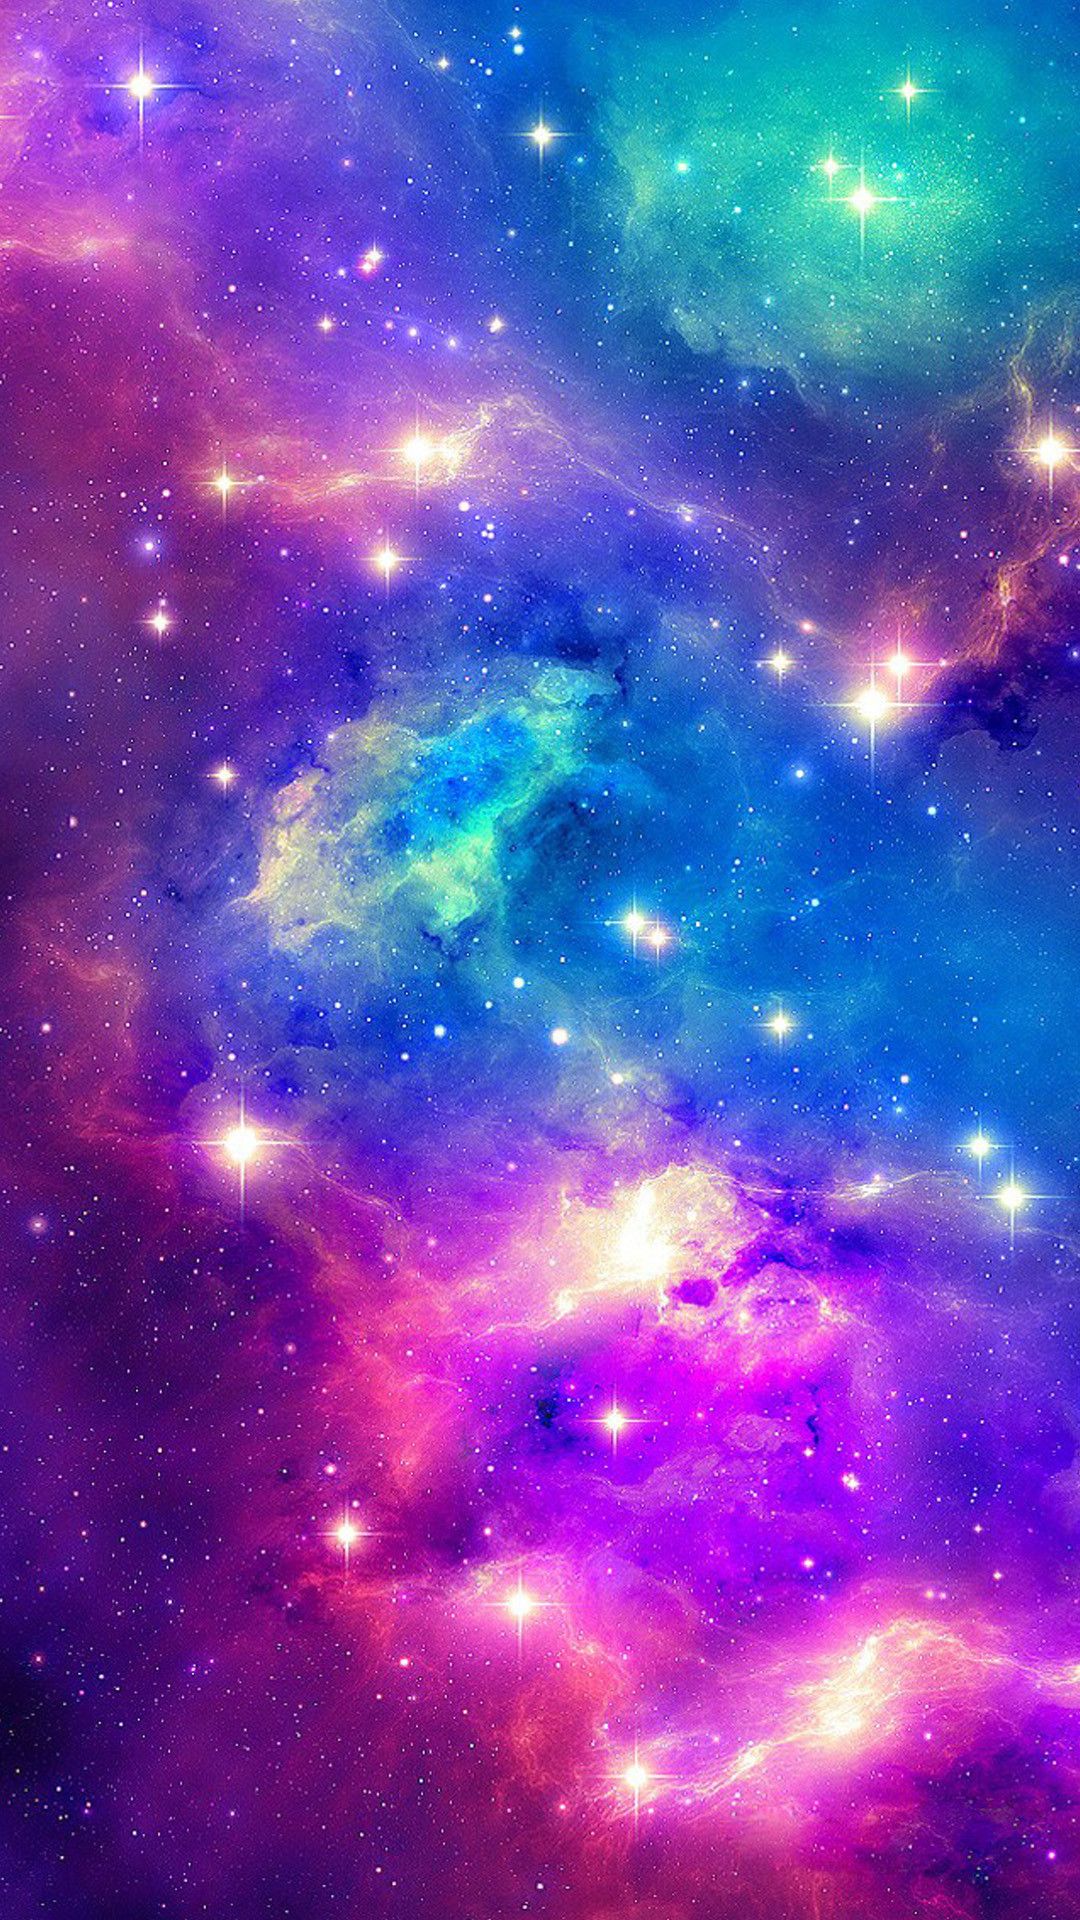 Cool Galaxy Wallpaper. Background. Photo. Image. Picture